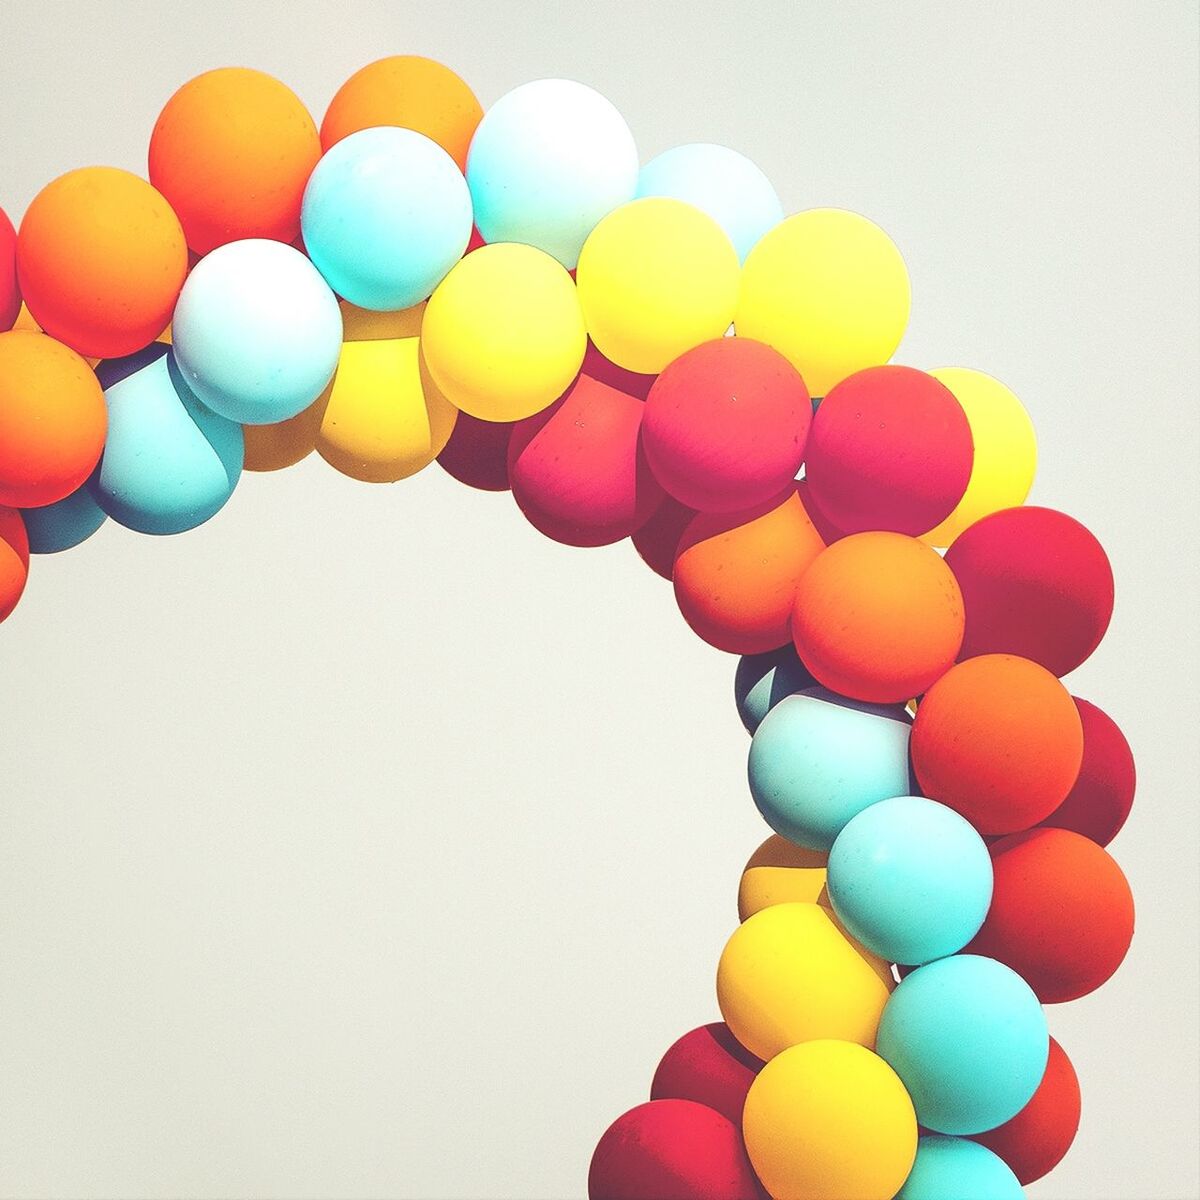 LOW ANGLE VIEW OF COLORFUL BALLOONS HANGING ON BALLOONS